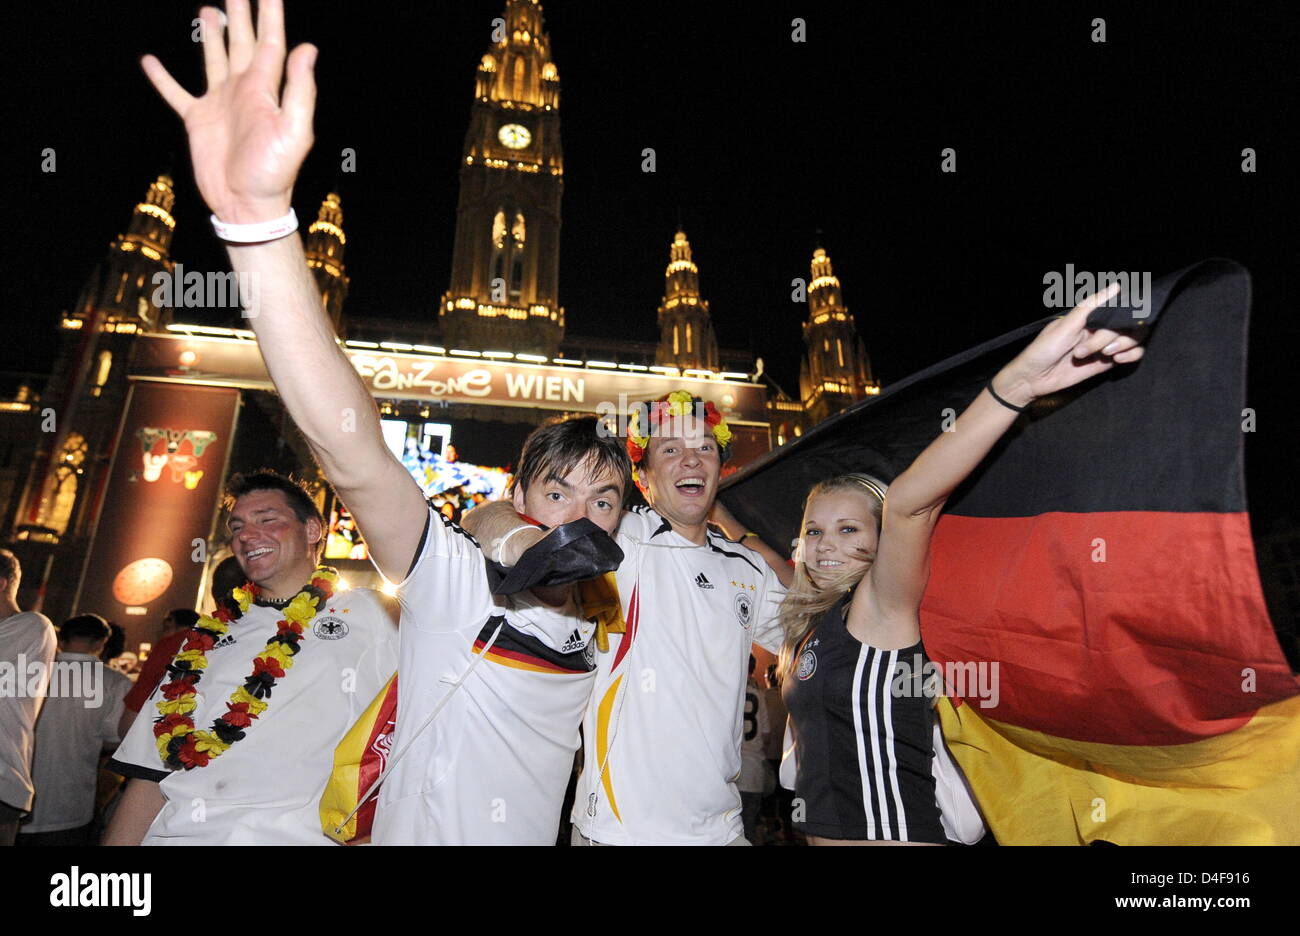 German supporters celebrating in the fanzone in Vienna, Austria on 19 June 2008, after Germany defeated Portugal with 3-2 in their quarter final match. Photo: Achim Scheidemann dpa +++###dpa###+++ Stock Photo